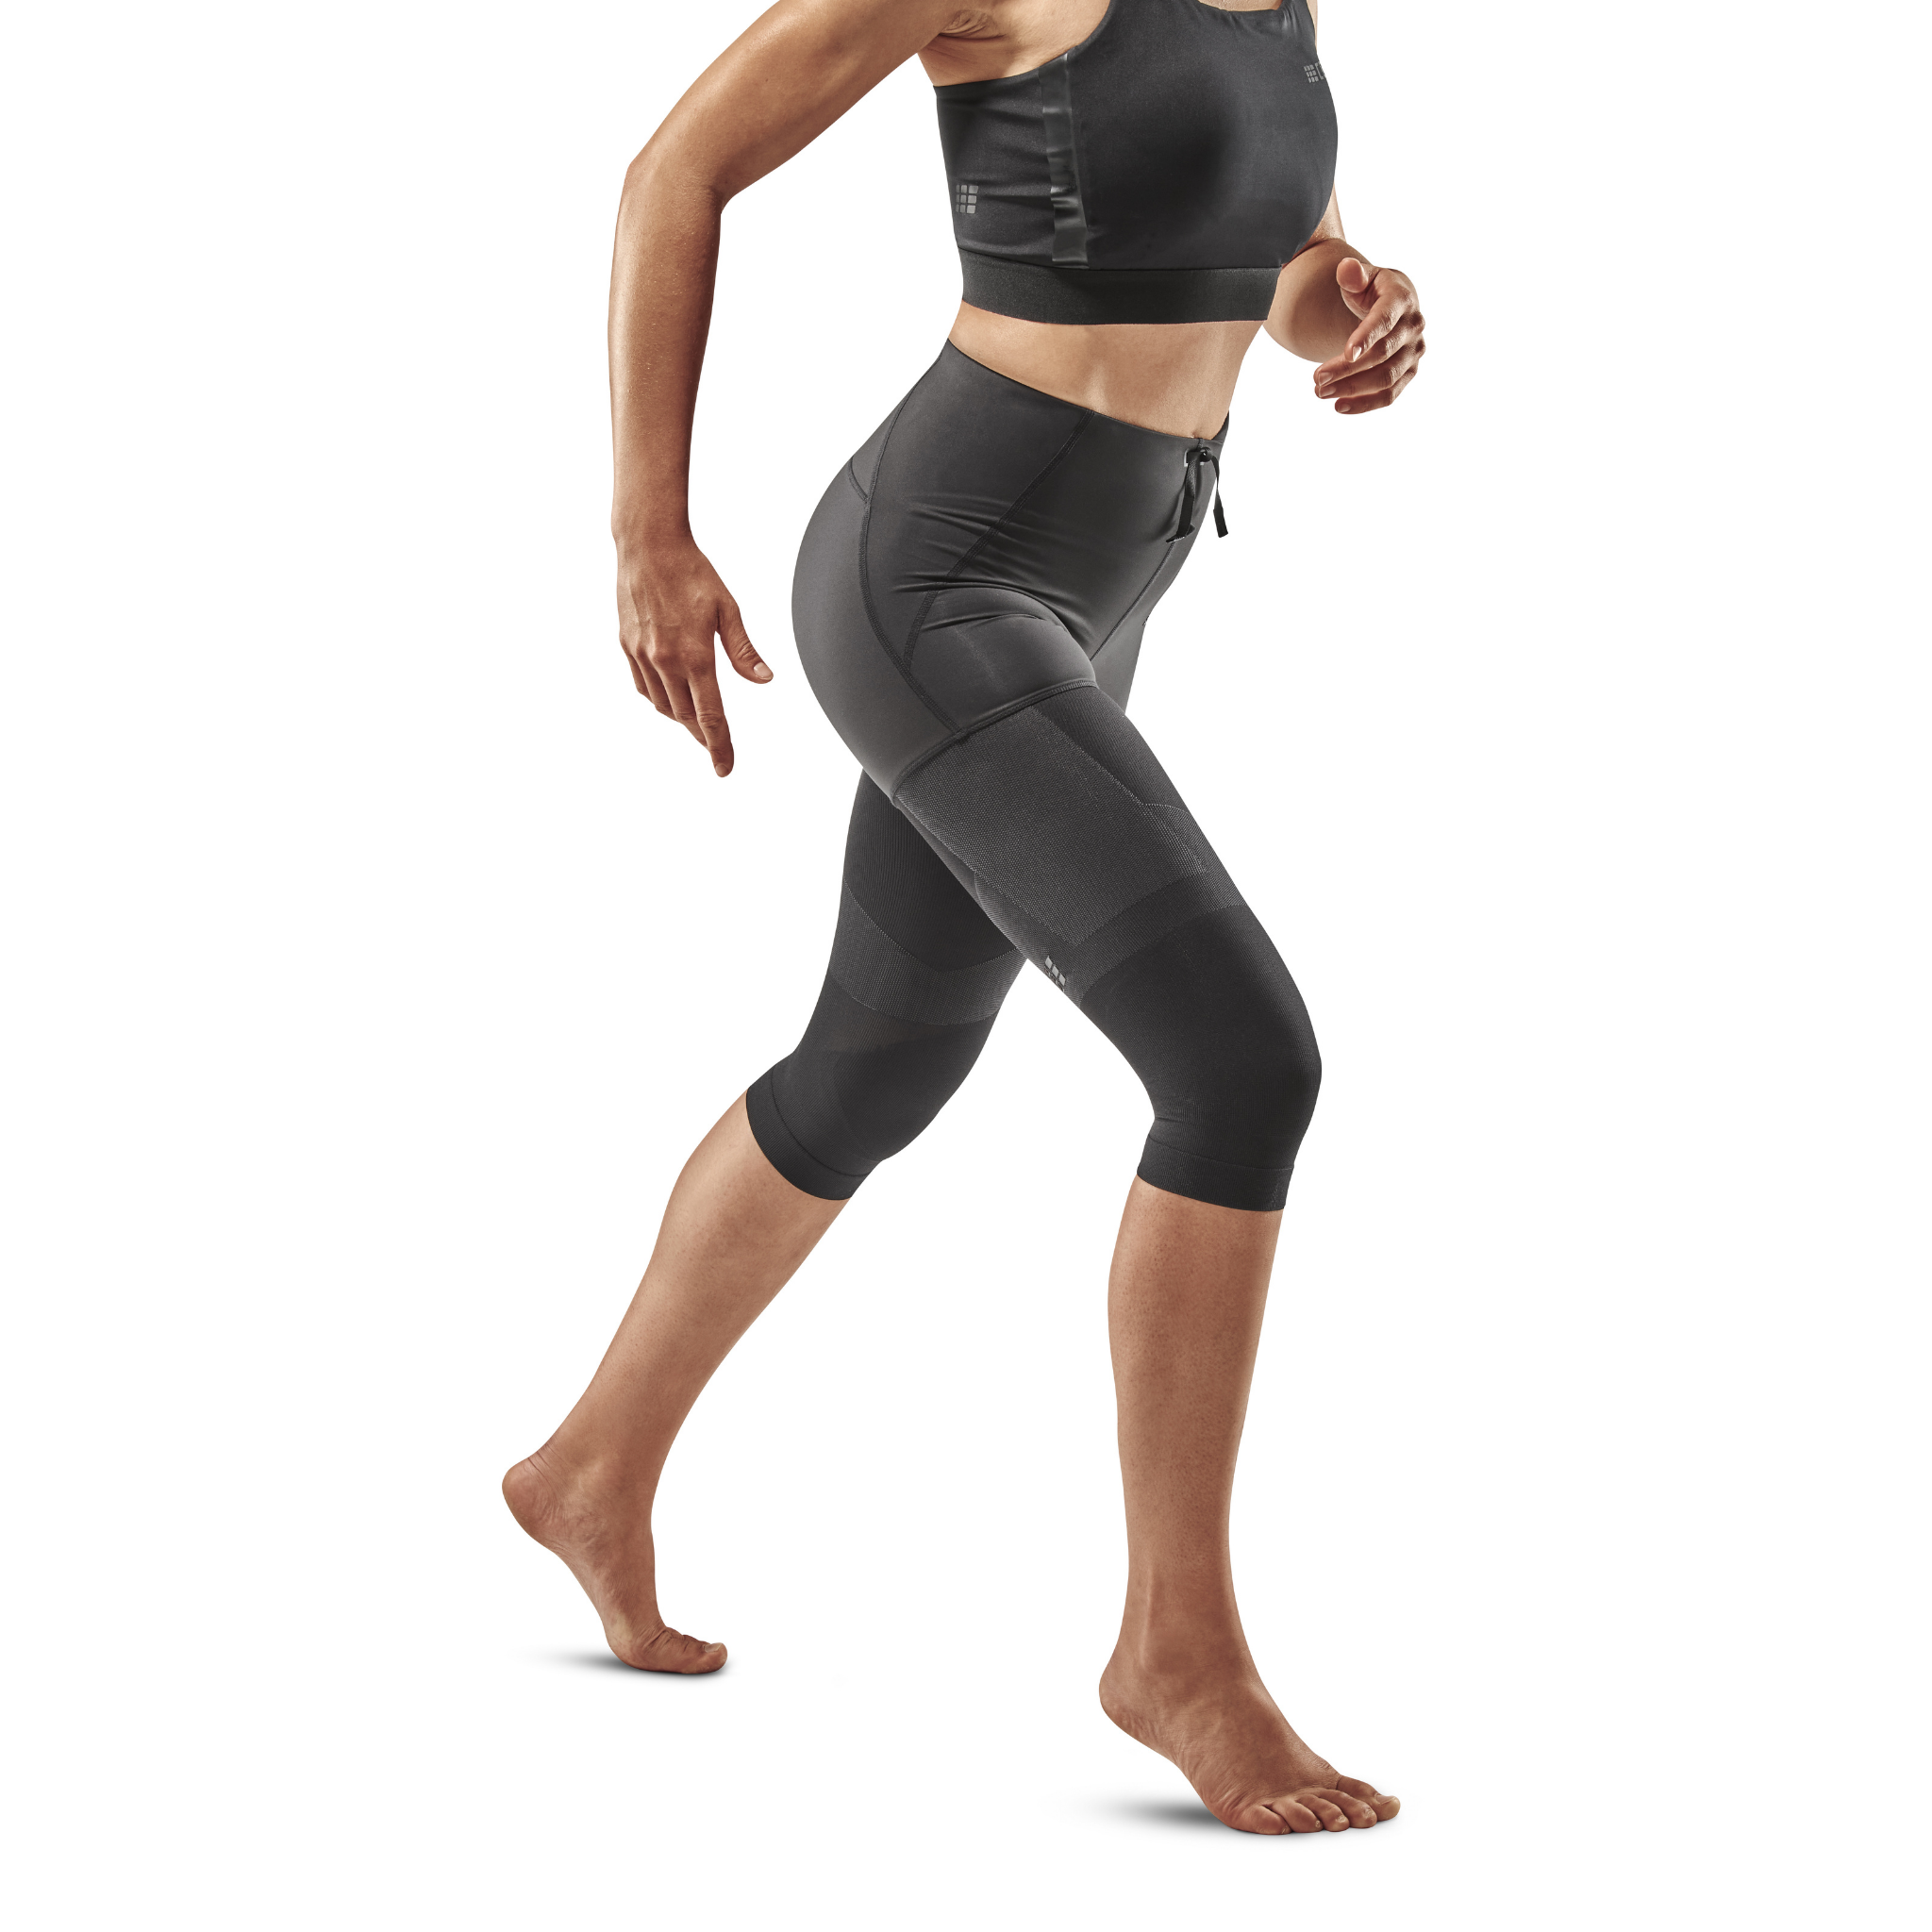 Black Diamond W Sessions Tights - Women's training and running pants